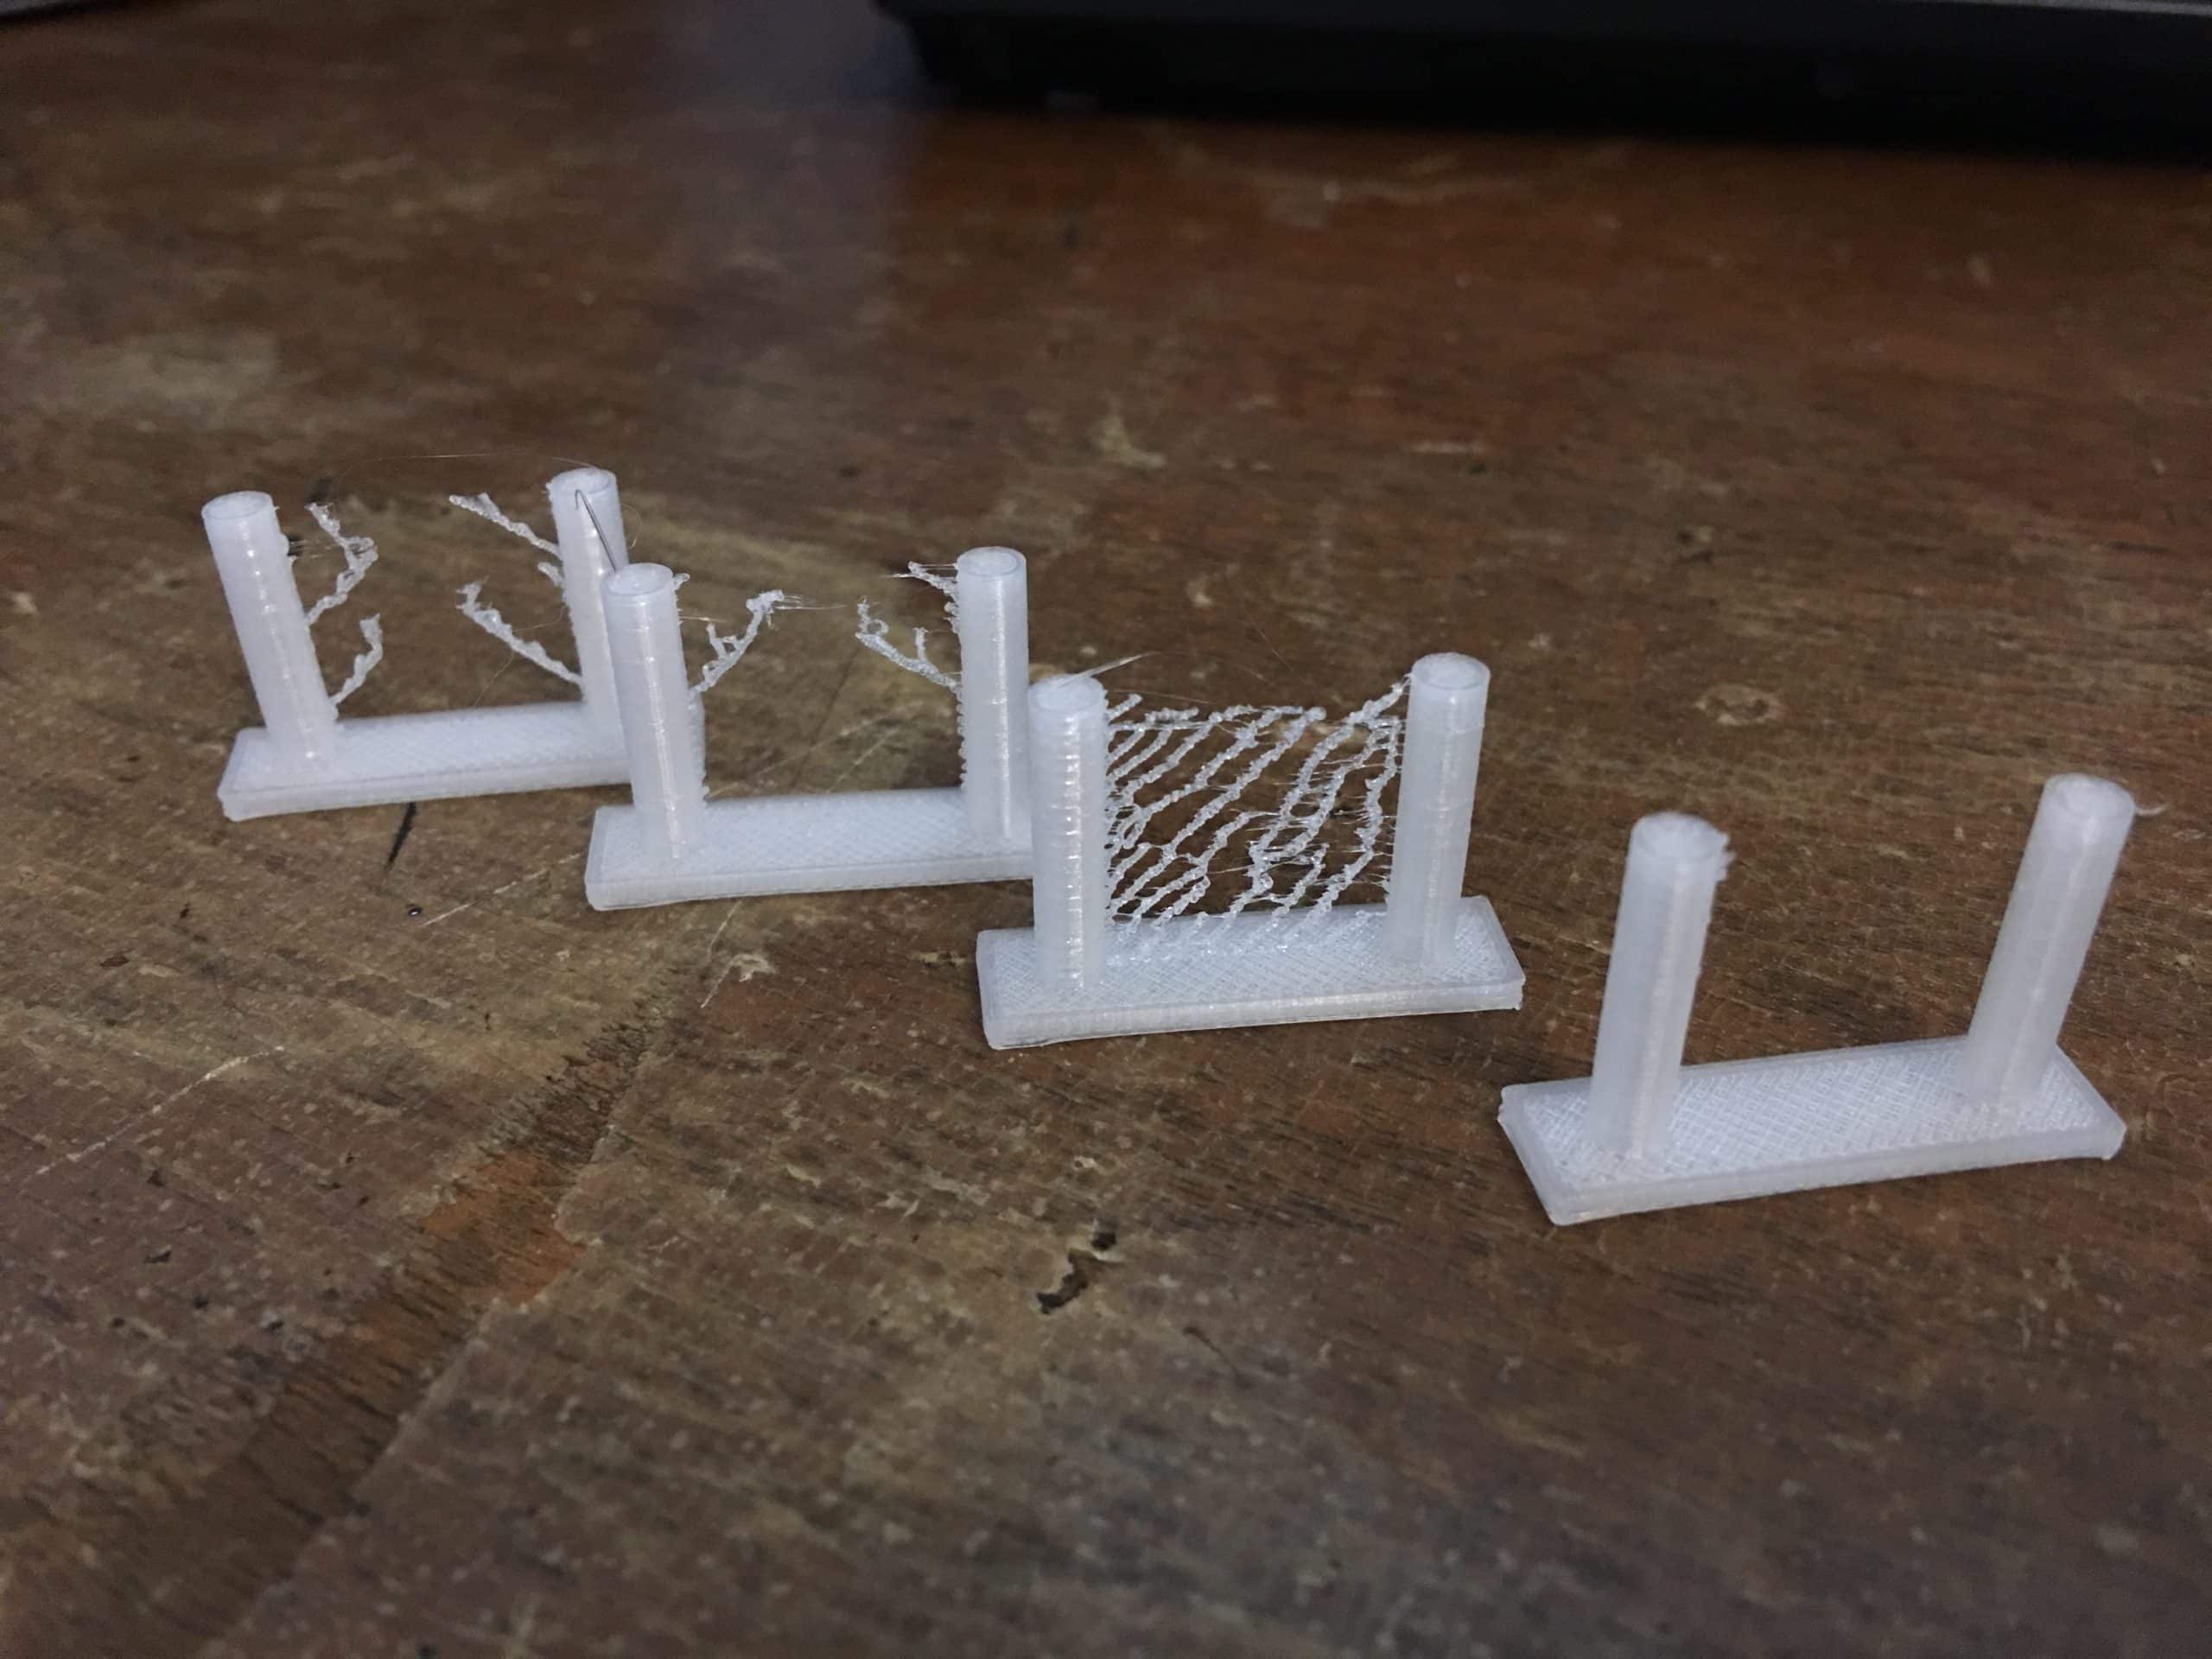 Retraction Speed Tower to set Ender 3 Retraction Settings 